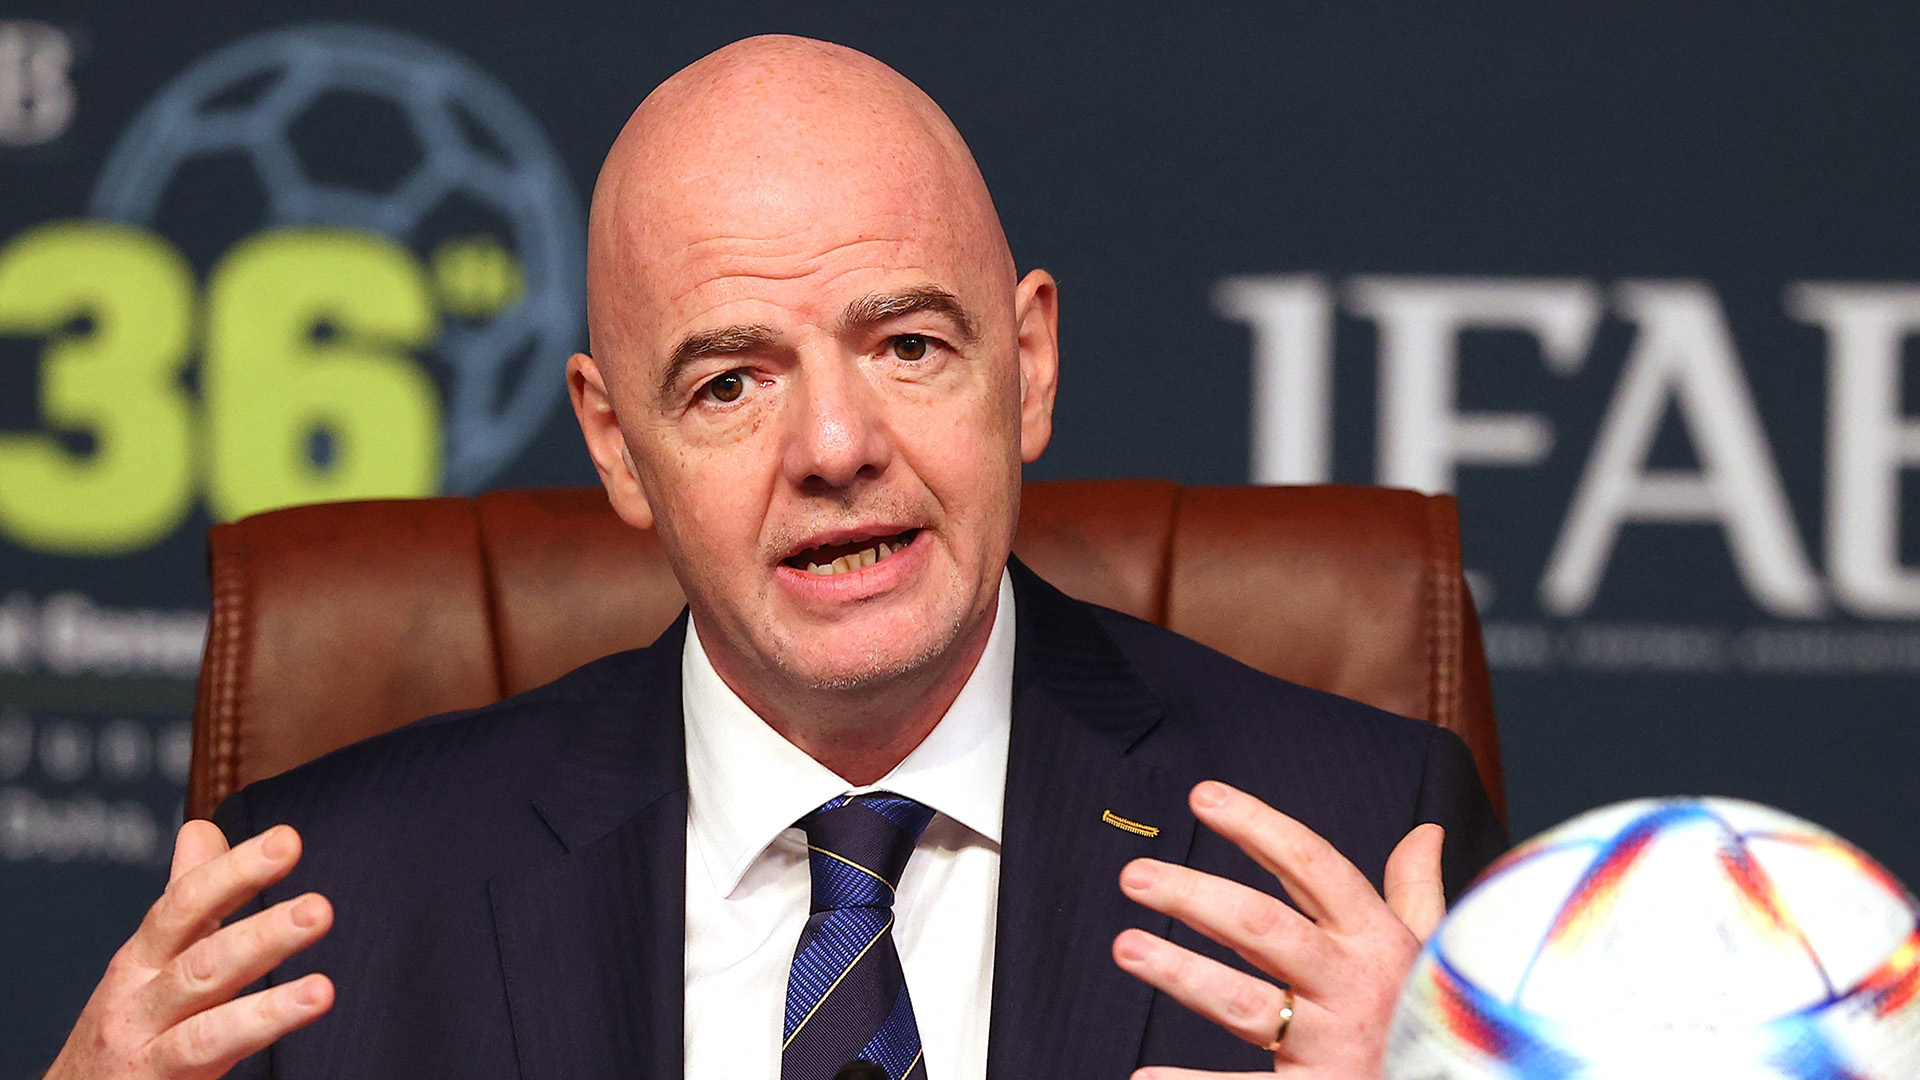 FIFA has approved 26-player squads for the 2022 World Cup teams